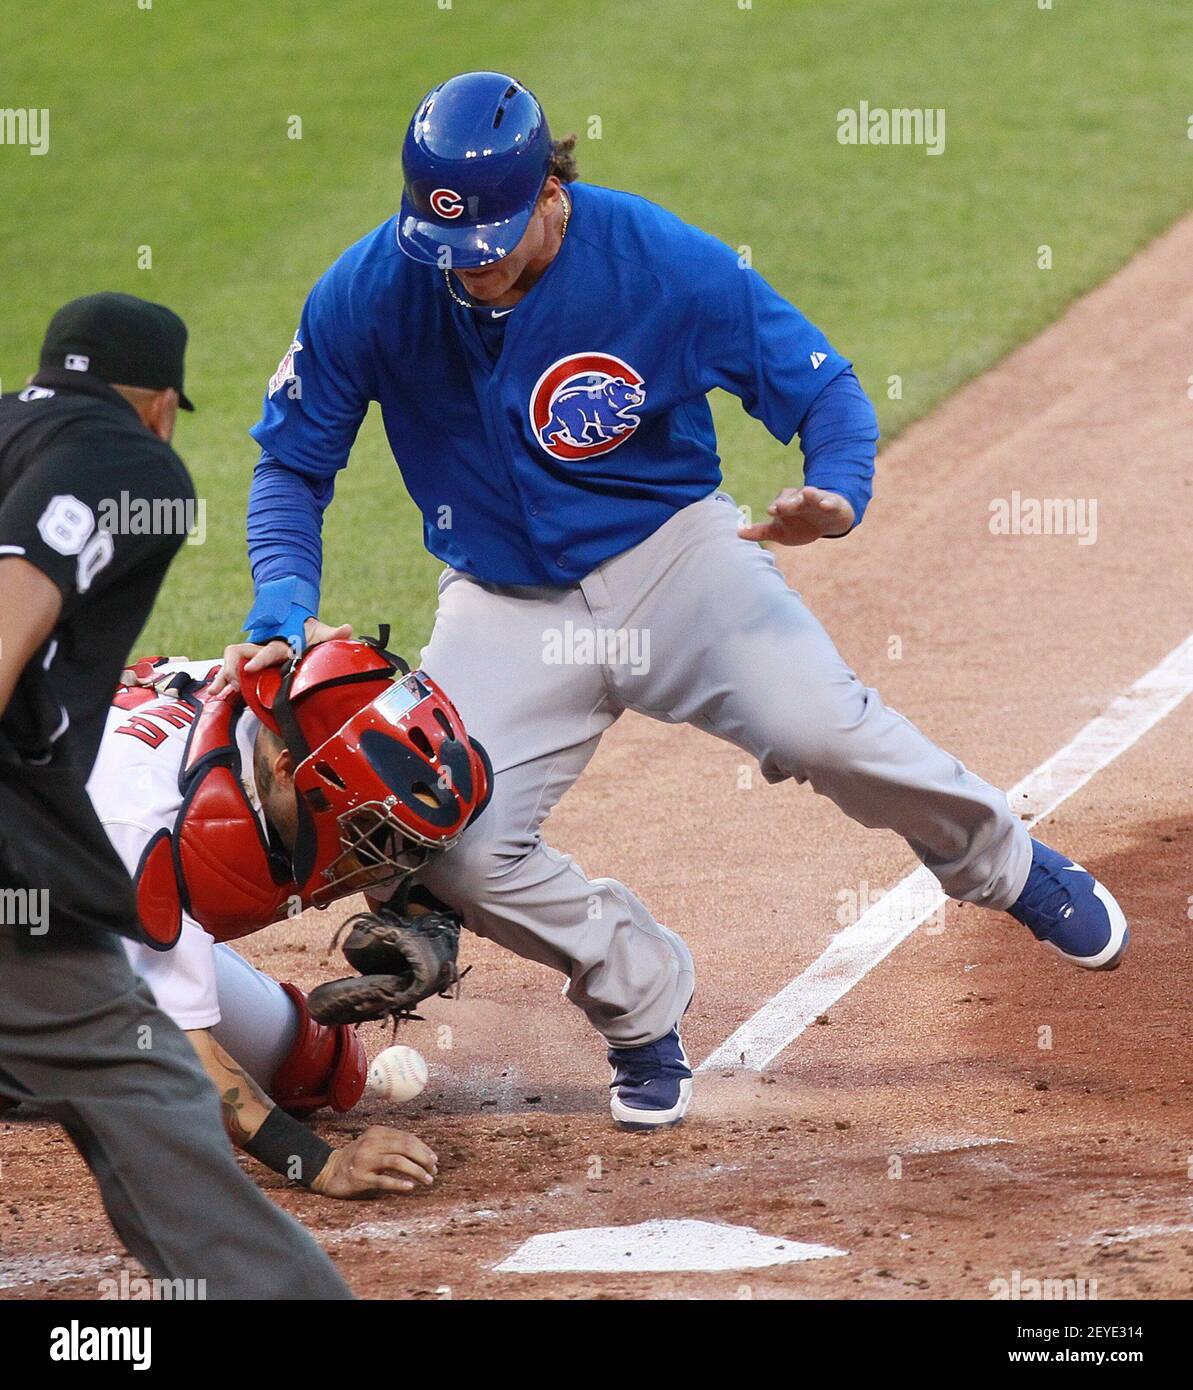 ST. LOUIS, MO - MAY 22: Chicago Cubs first baseman Anthony Rizzo